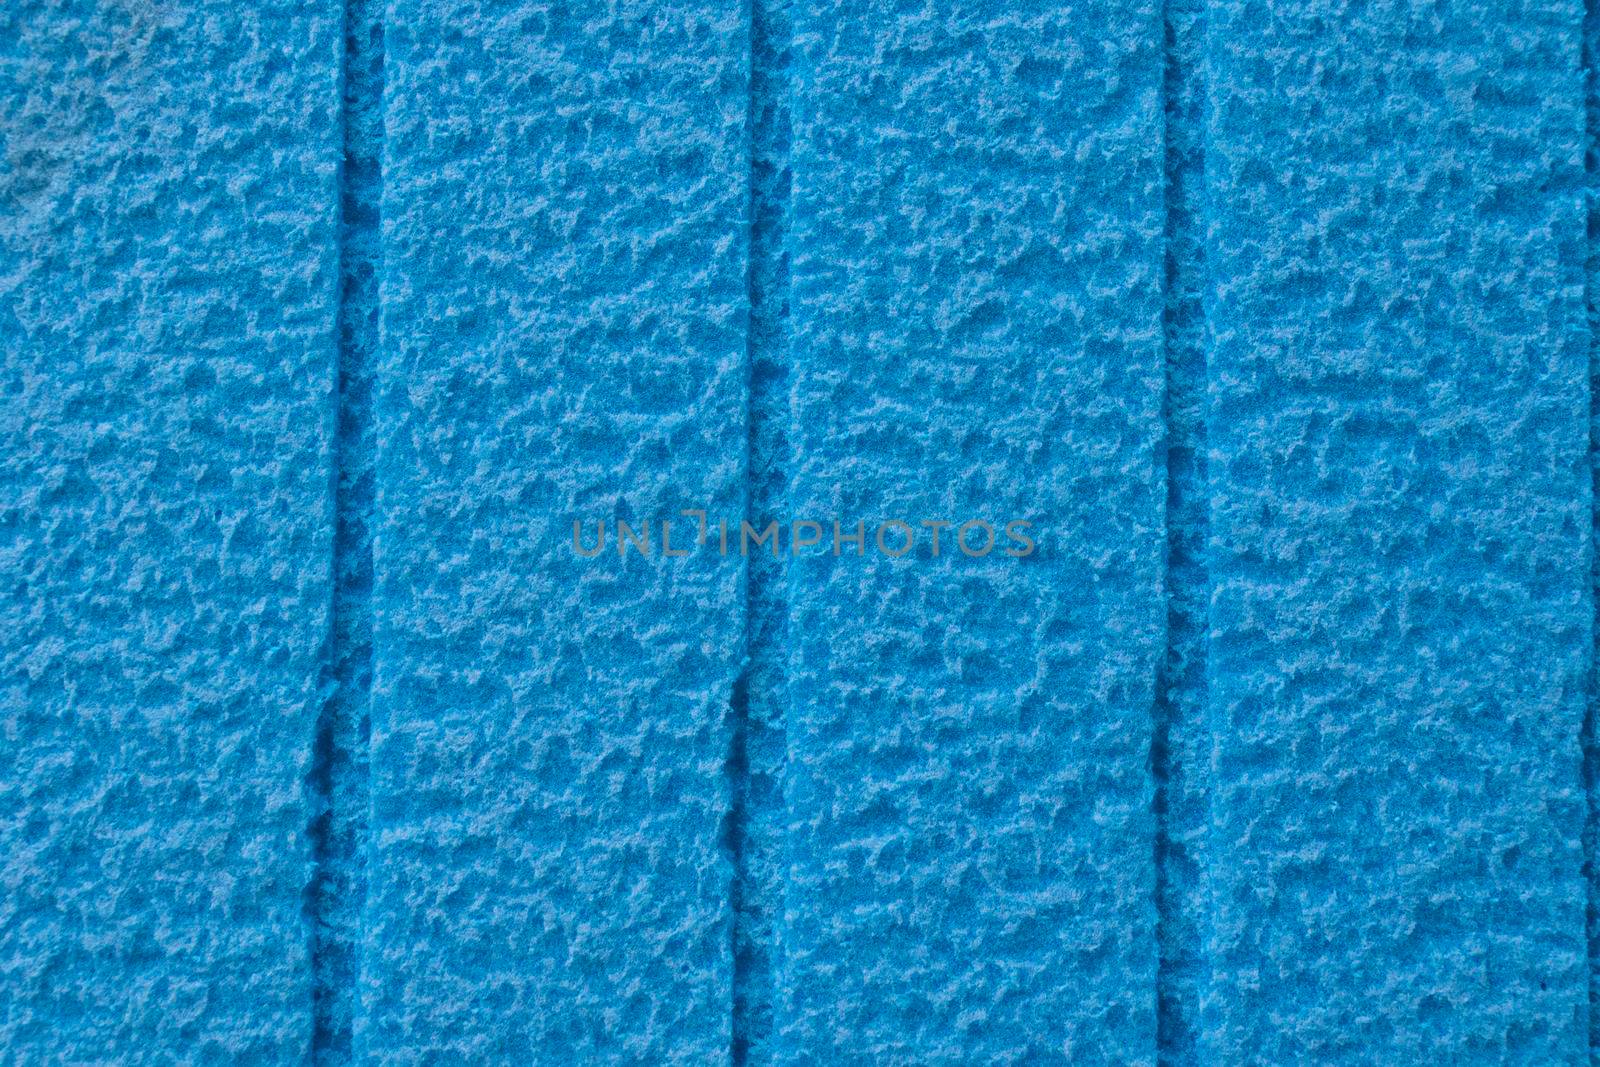 XPS texture and background, blue color